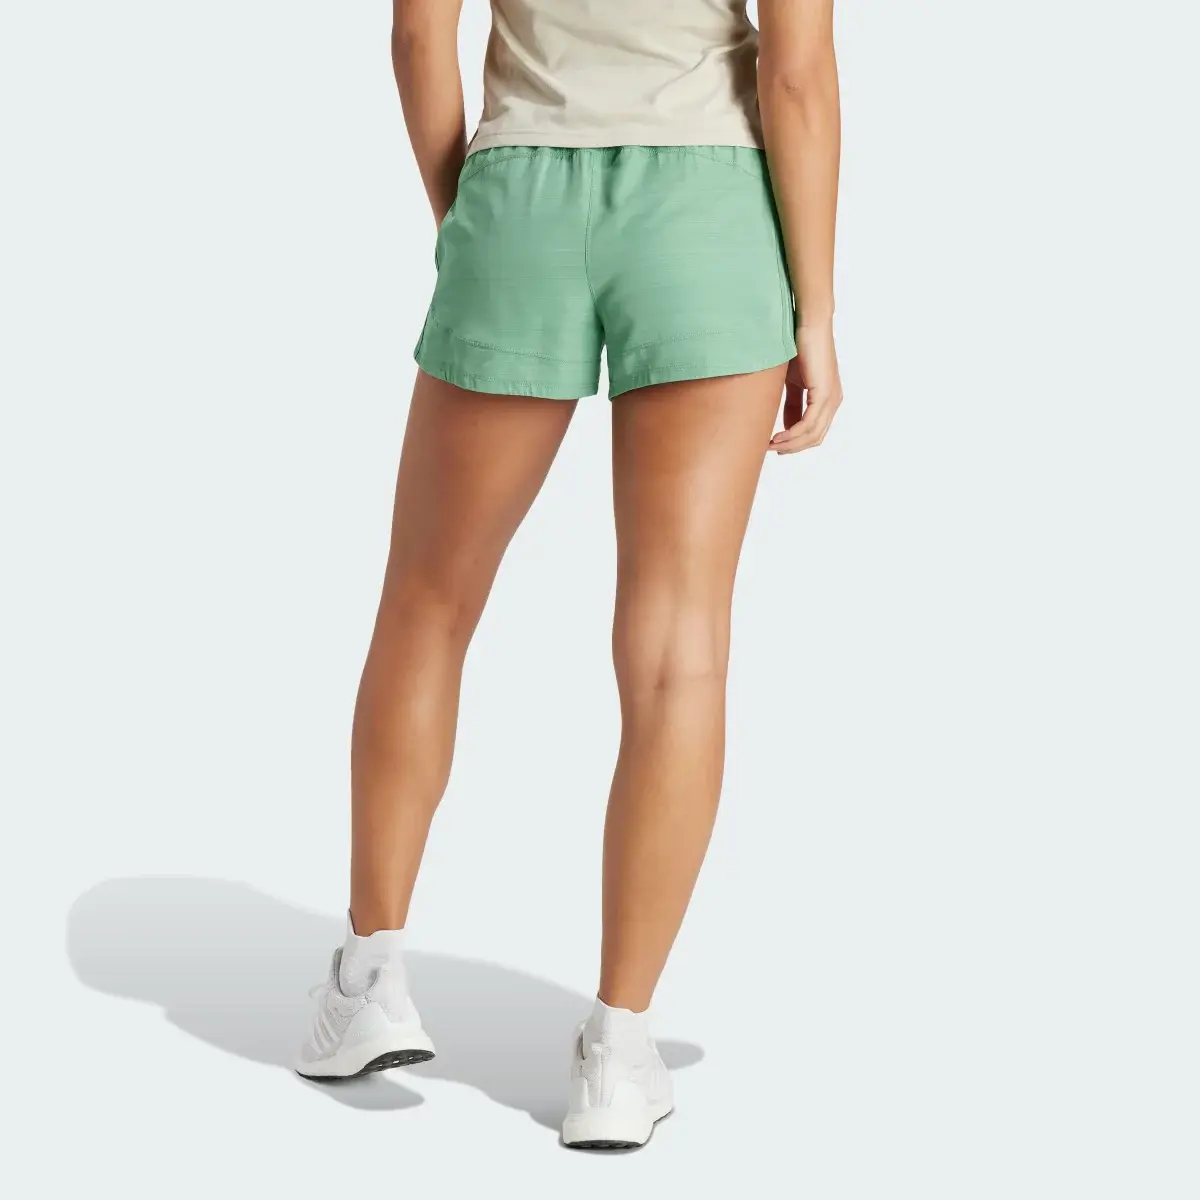 Adidas Pacer Training 3-Stripes Woven High-Rise Shorts. 3